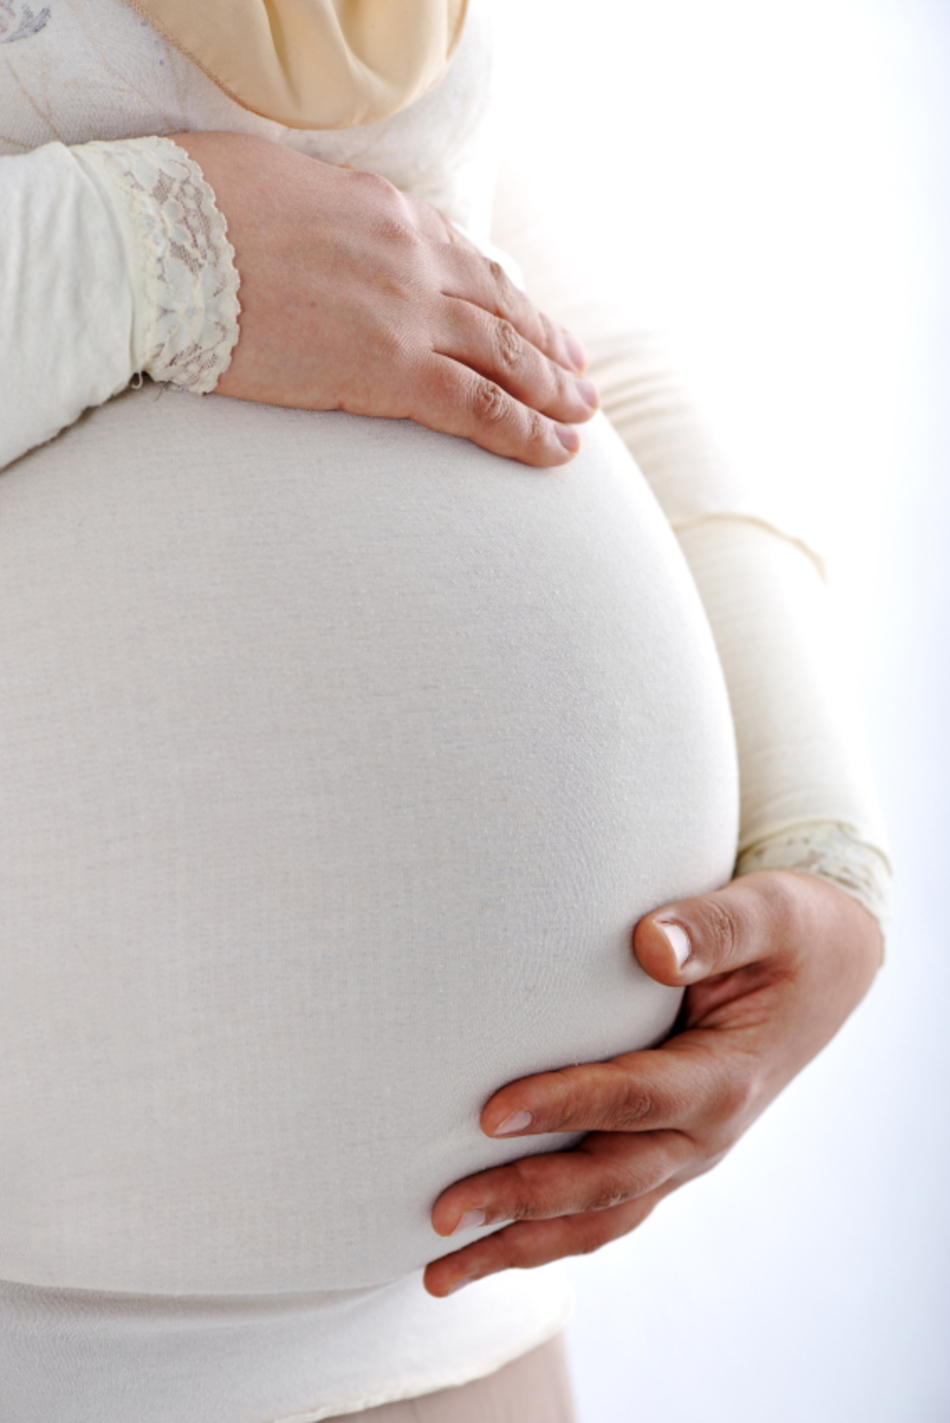 The Shocking Truth about Maternal Mortality in the U.S.